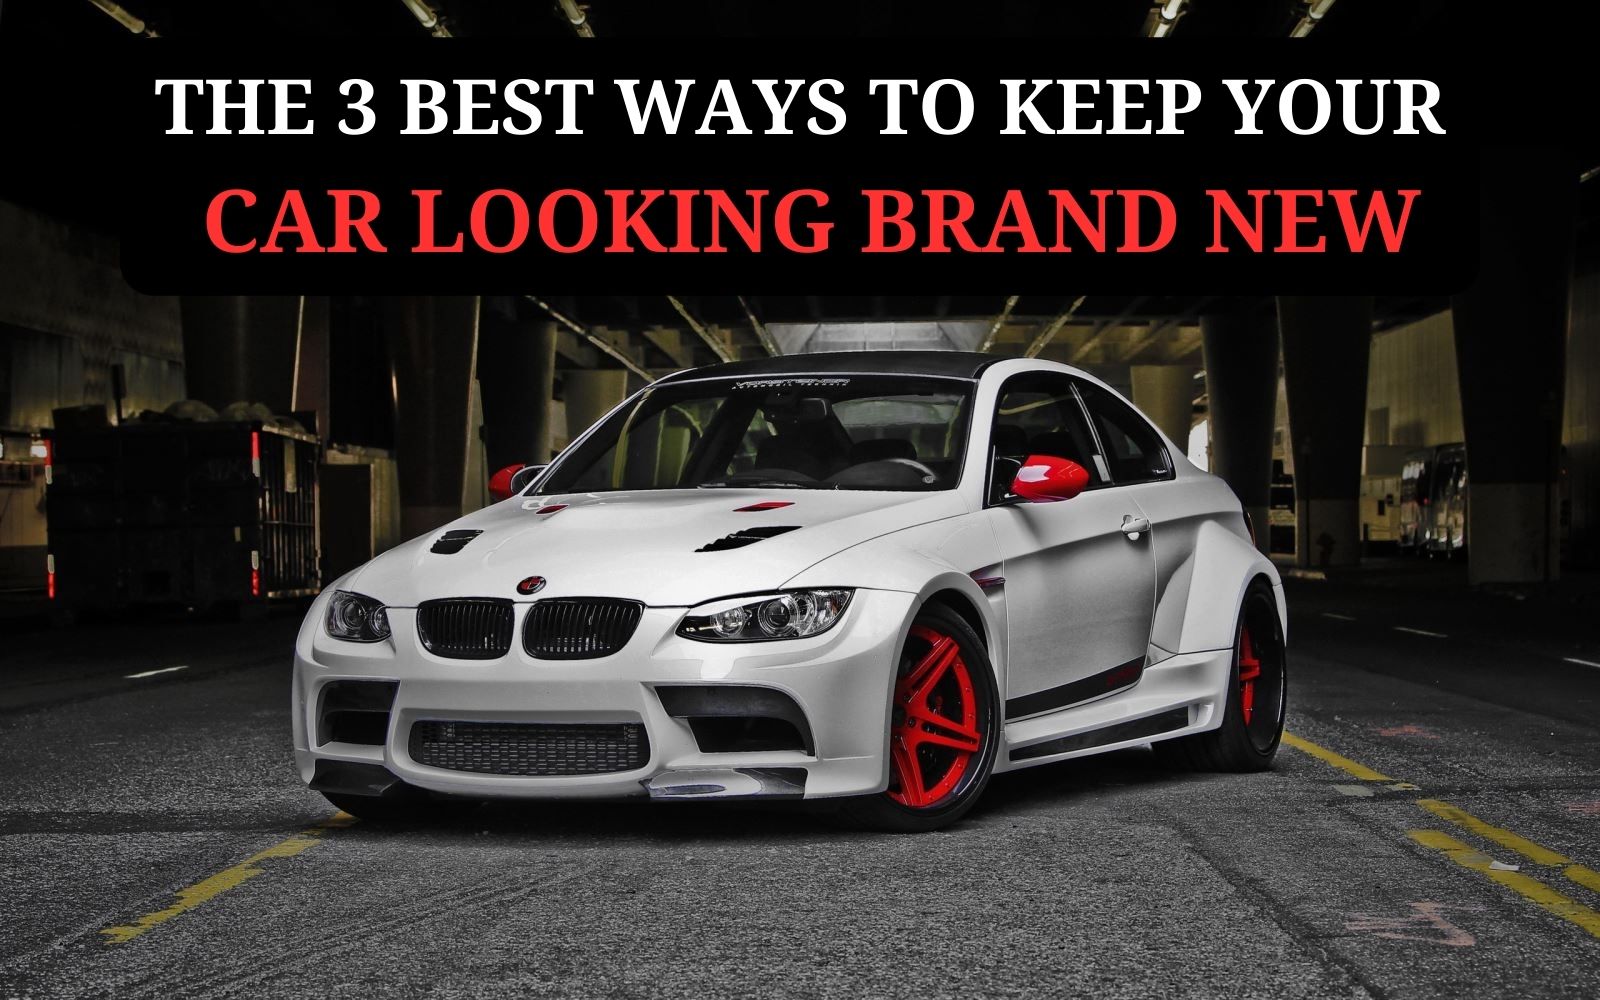 The 3 Best Ways To Keep Your Car Looking Brand New